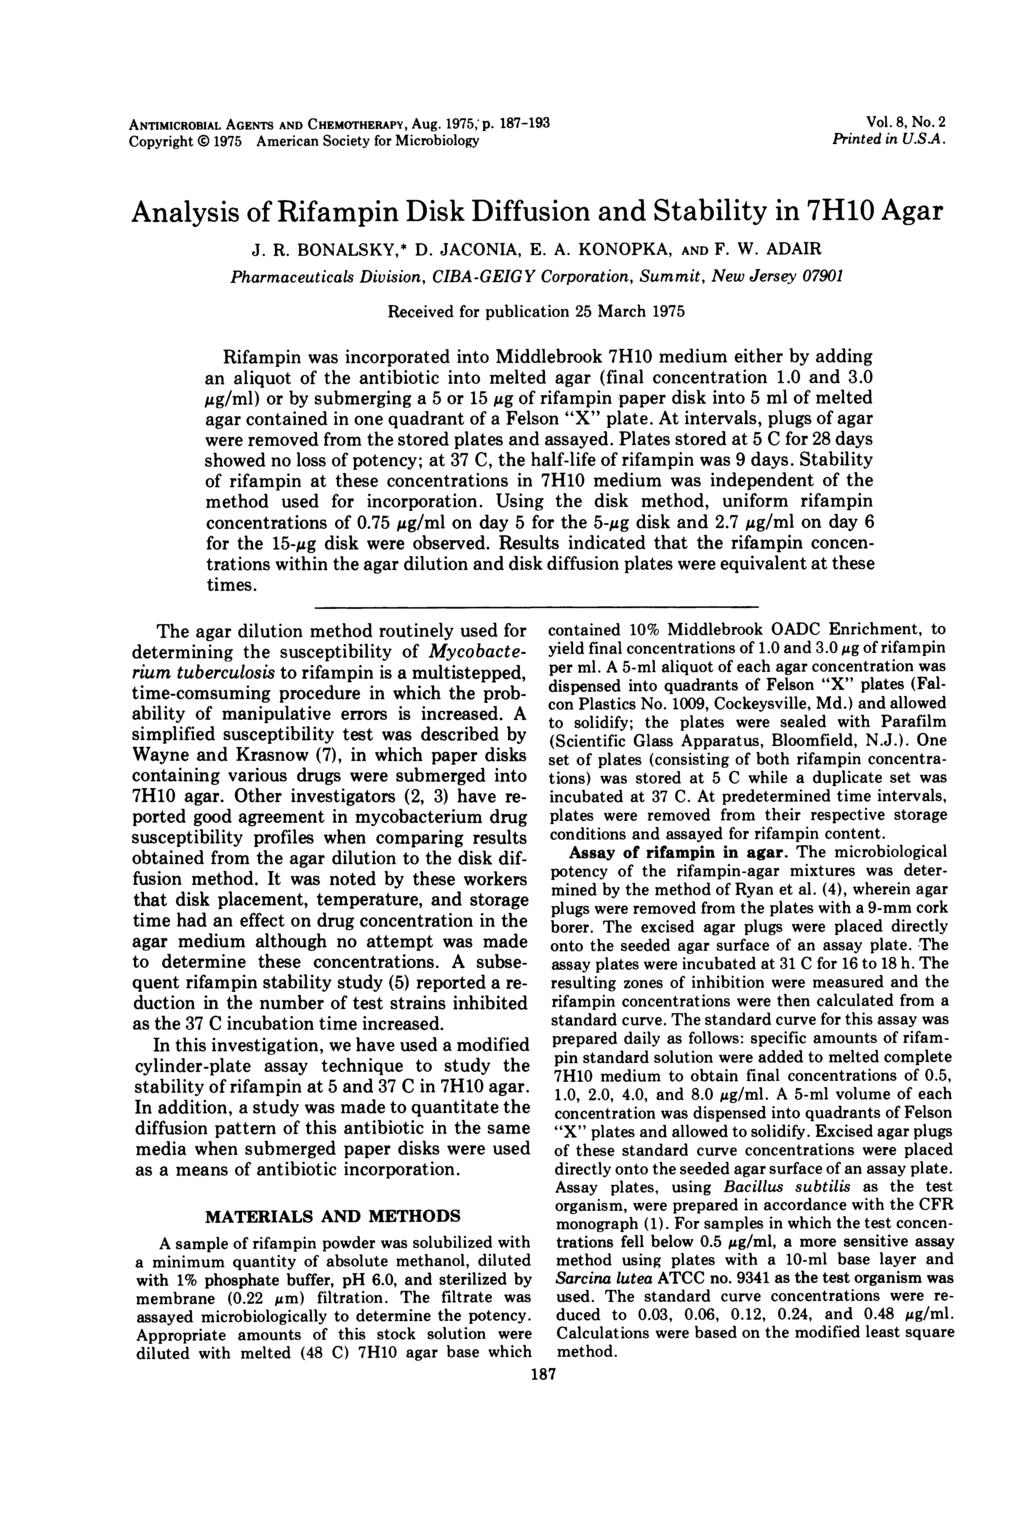 ANTIMICROBIAL AGENTS AND CHEMOTHERAPY, Aug. 1975, p. 187-193 Copyright i 1975 American Society for Microbiology Vol. 8, No. 2 Printed in U.SA.